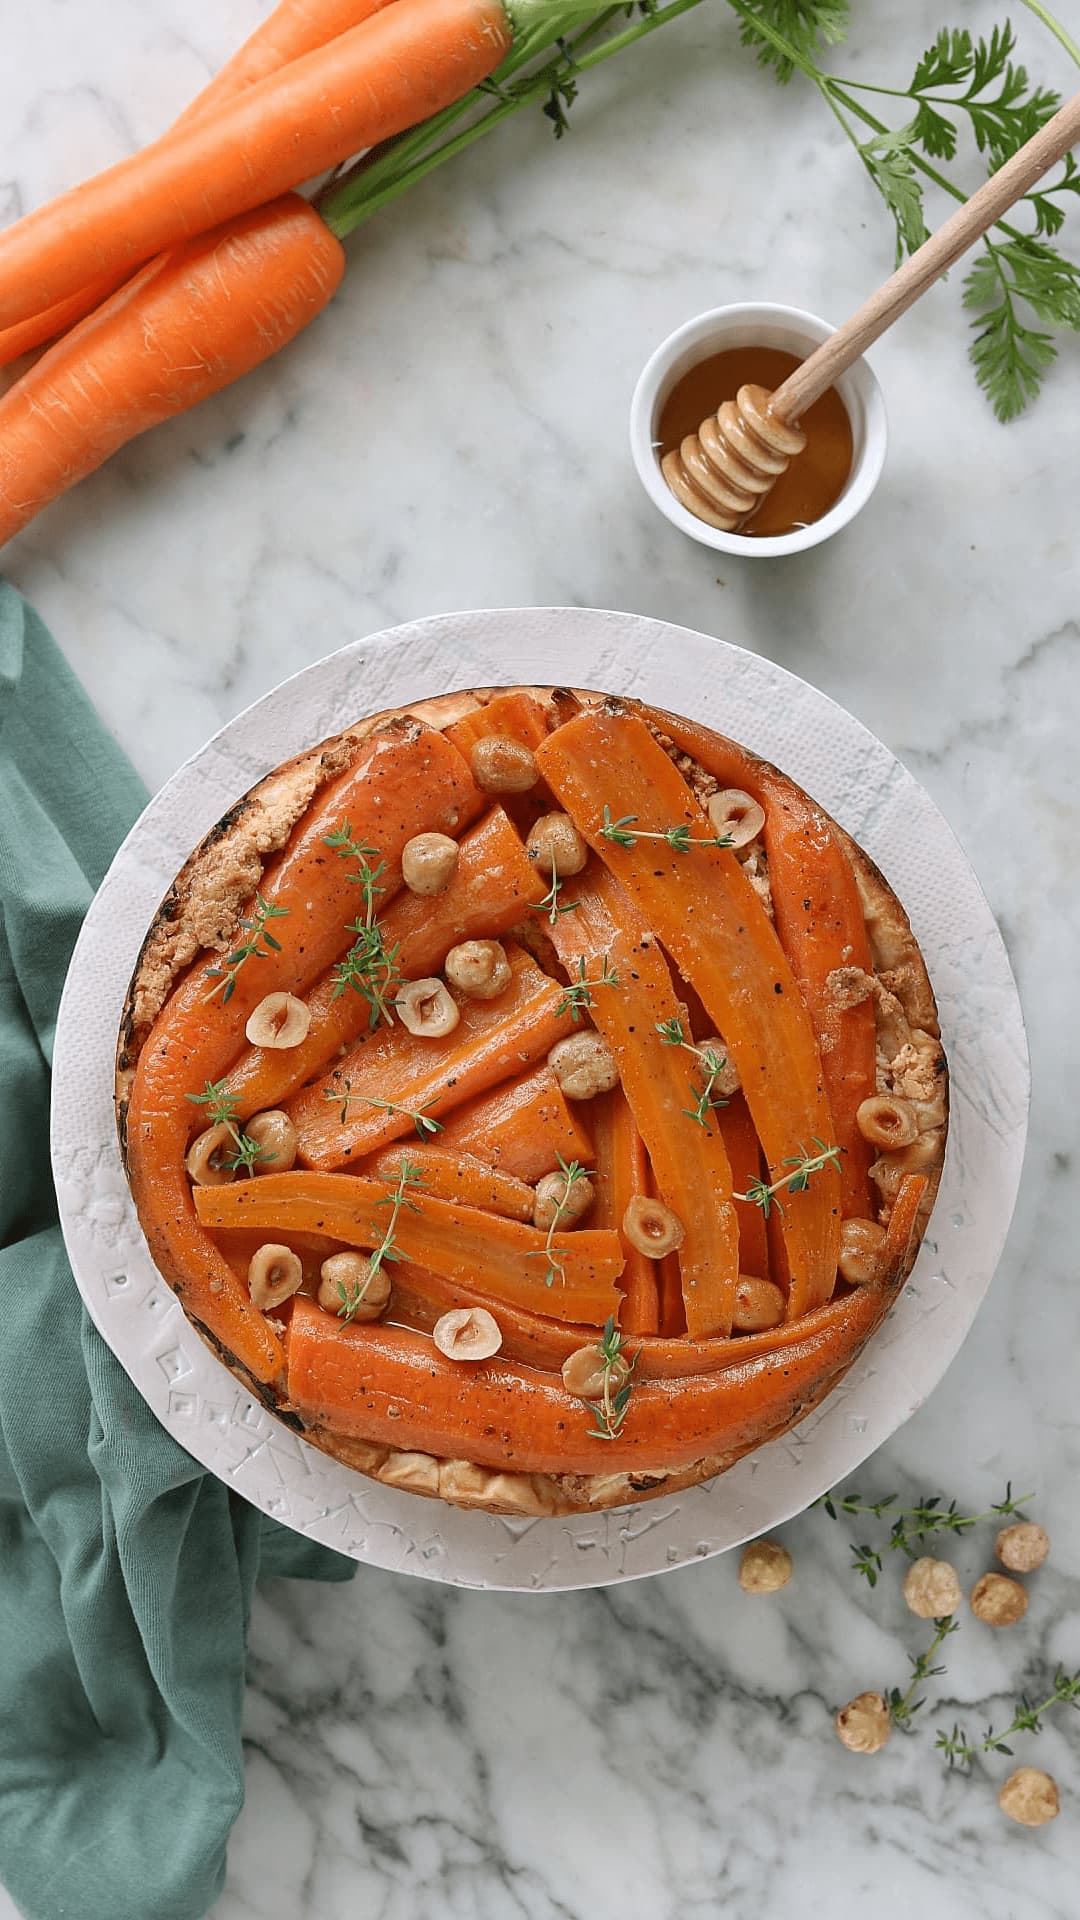 Savory pie with cheese and glazed carrots (carrot tatin) with honey